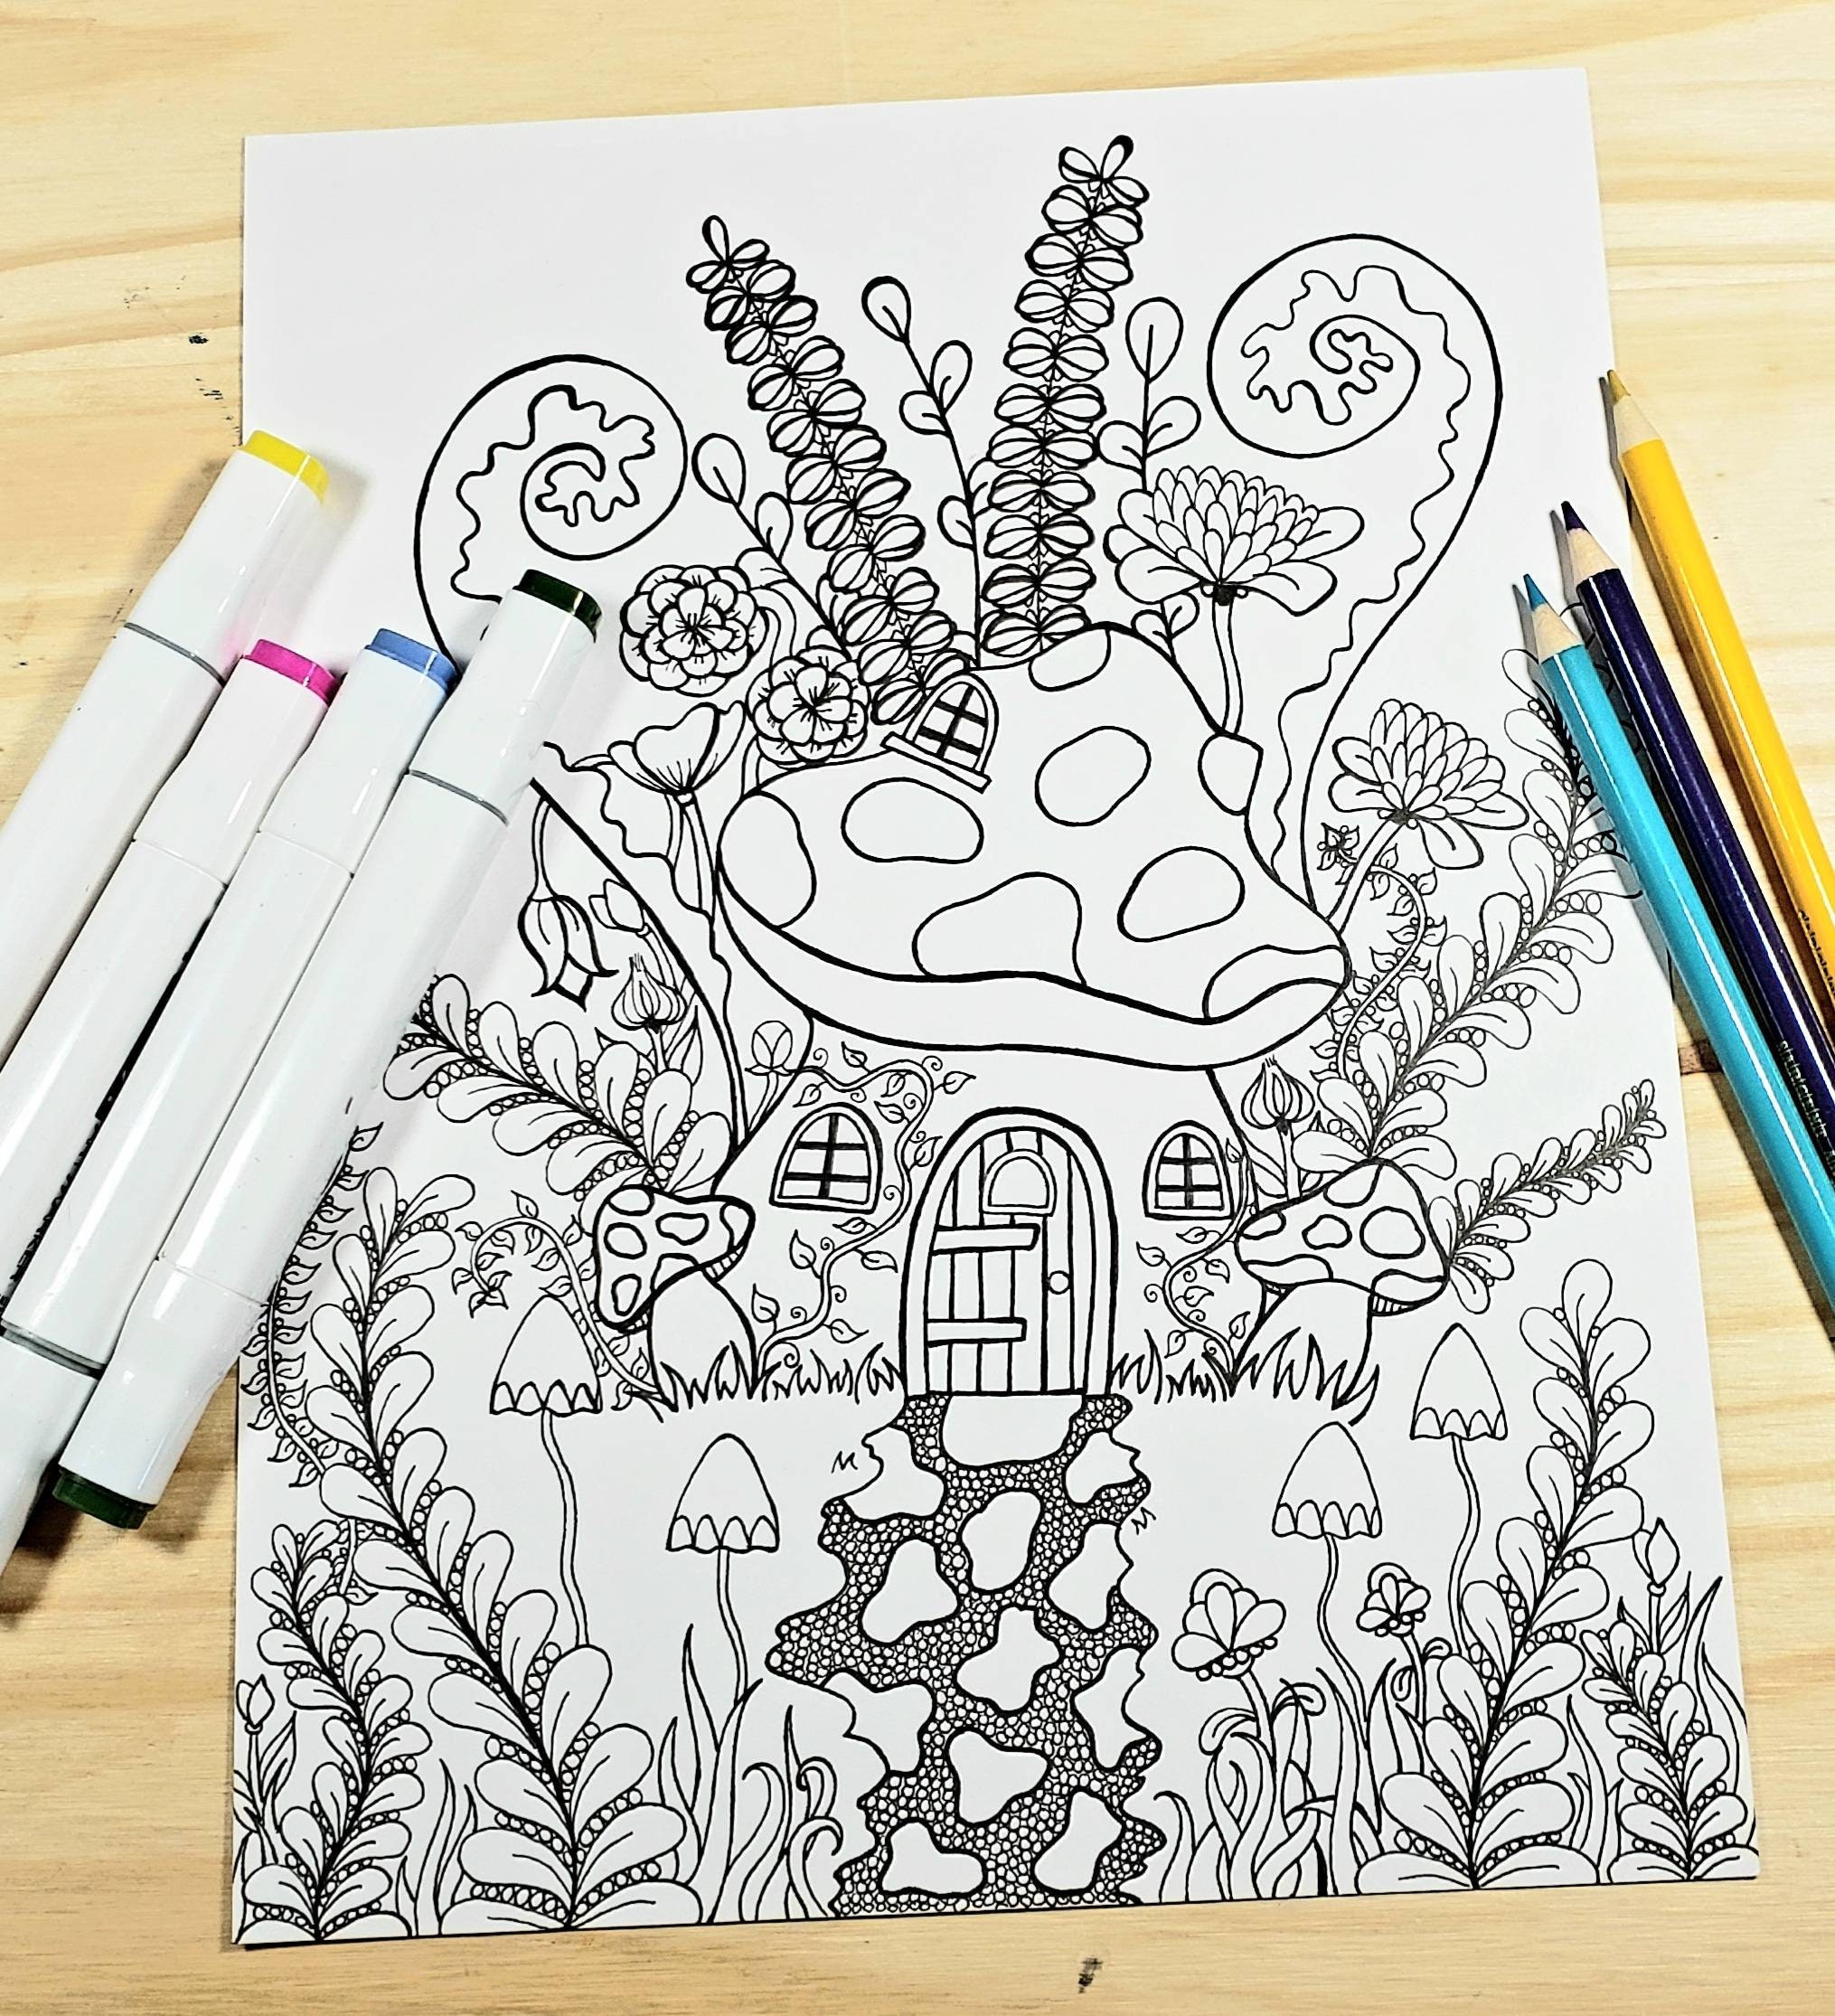  Just Doodle It - Fairy Houses: A Reverse Coloring Book For  Adults to Relax, Get Creative, and Have Fun With (Reverse Coloring Activity  Books for Adults and Kids): 9798390159415: Publishing, Lindenwood